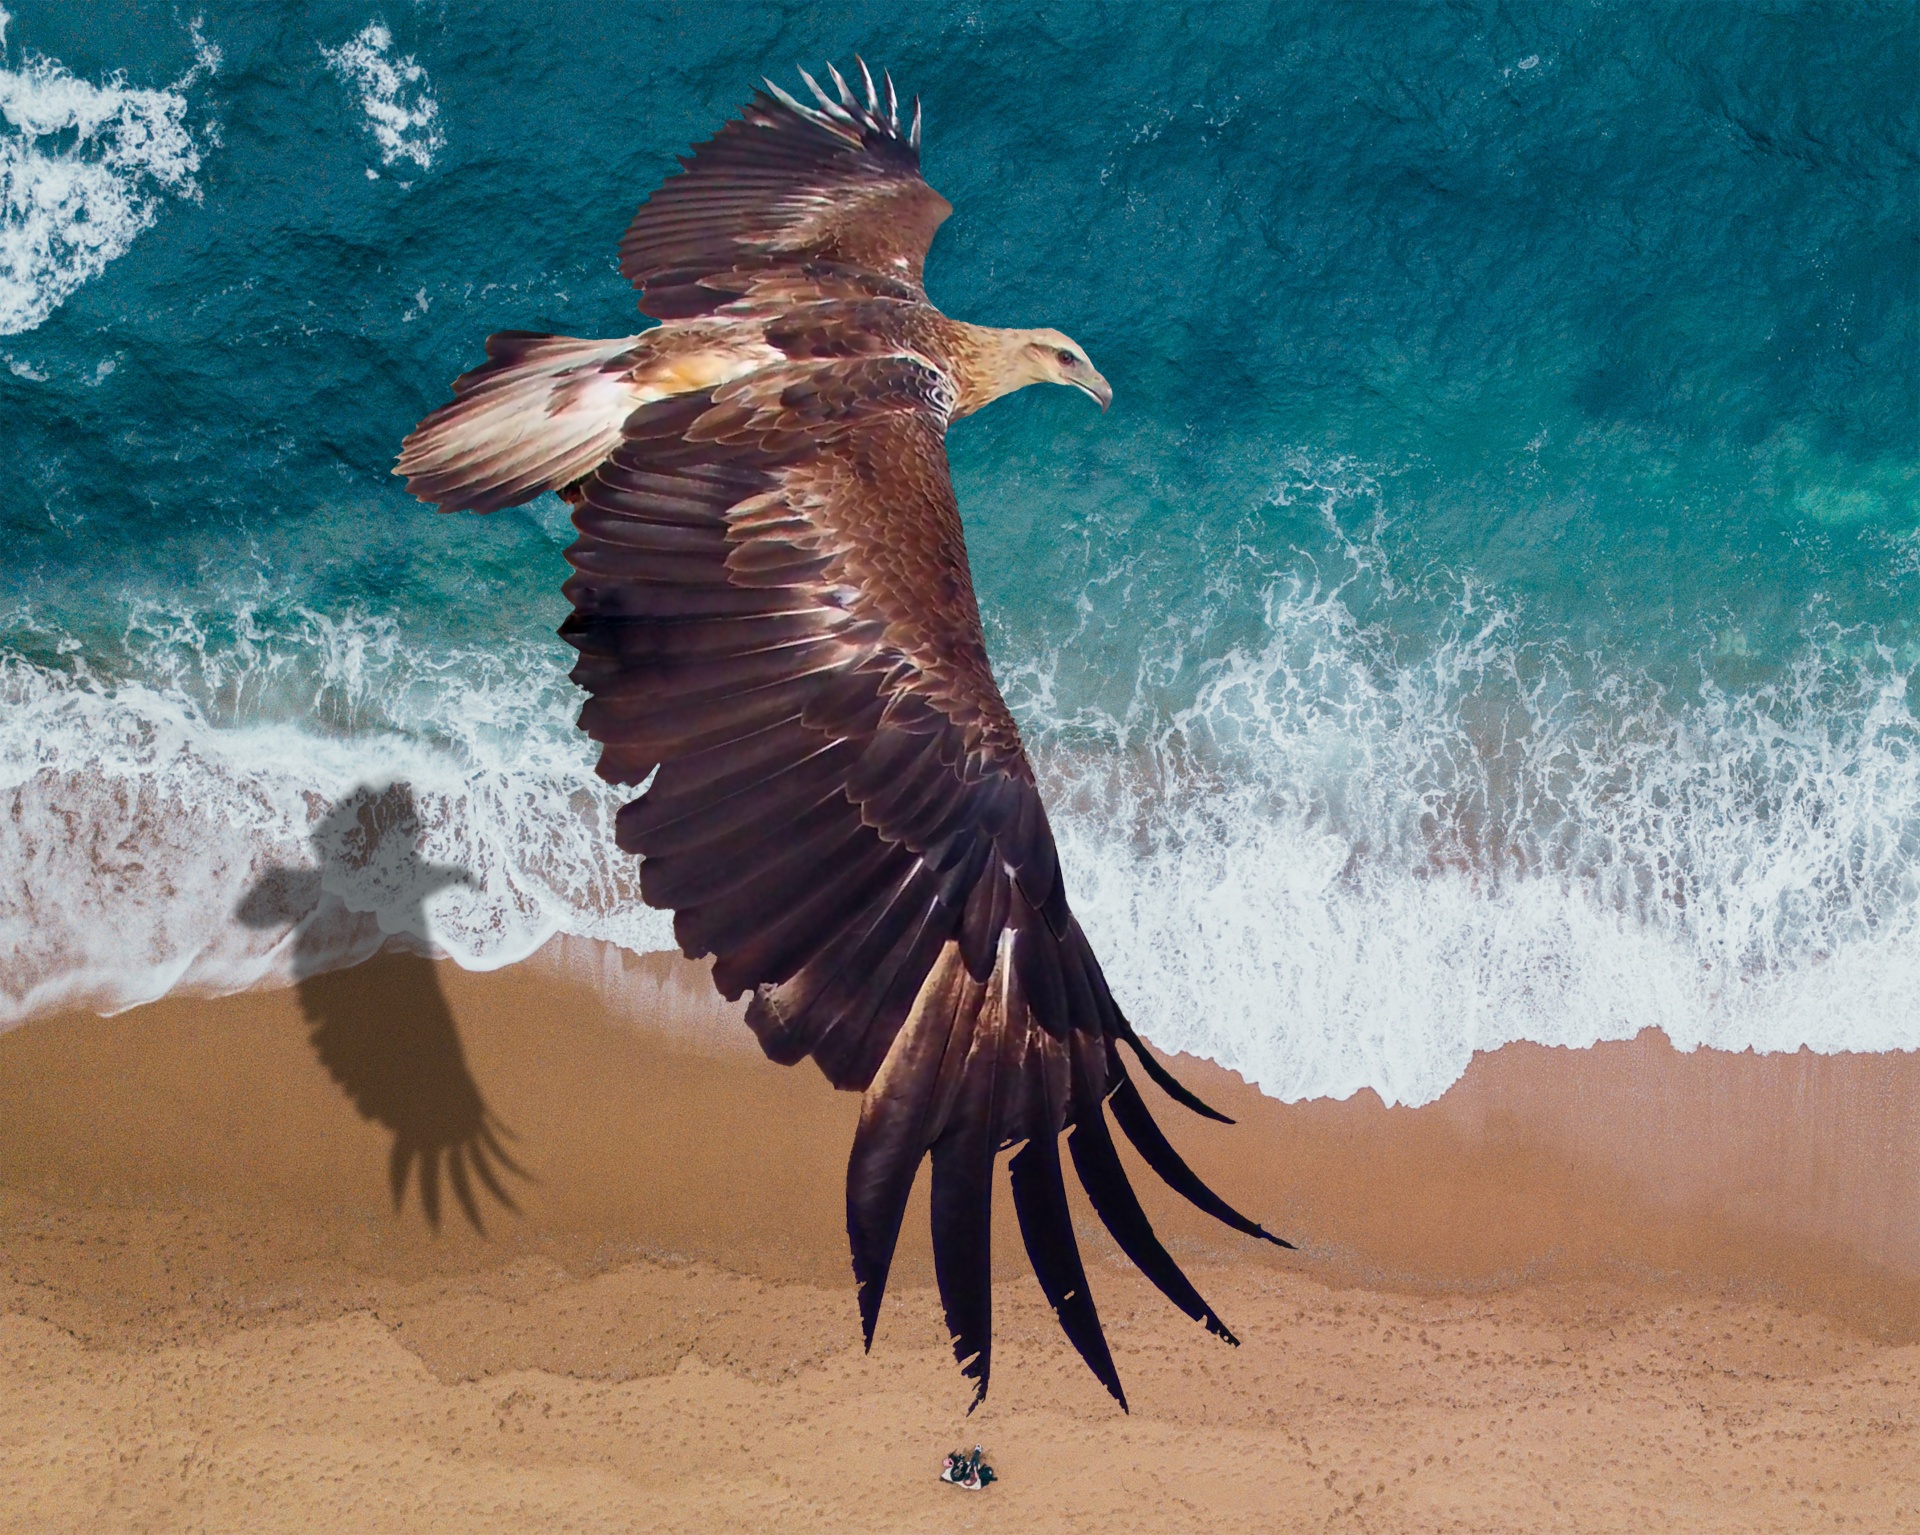 Soaring raptor casting a shadow on the surf and sand below.